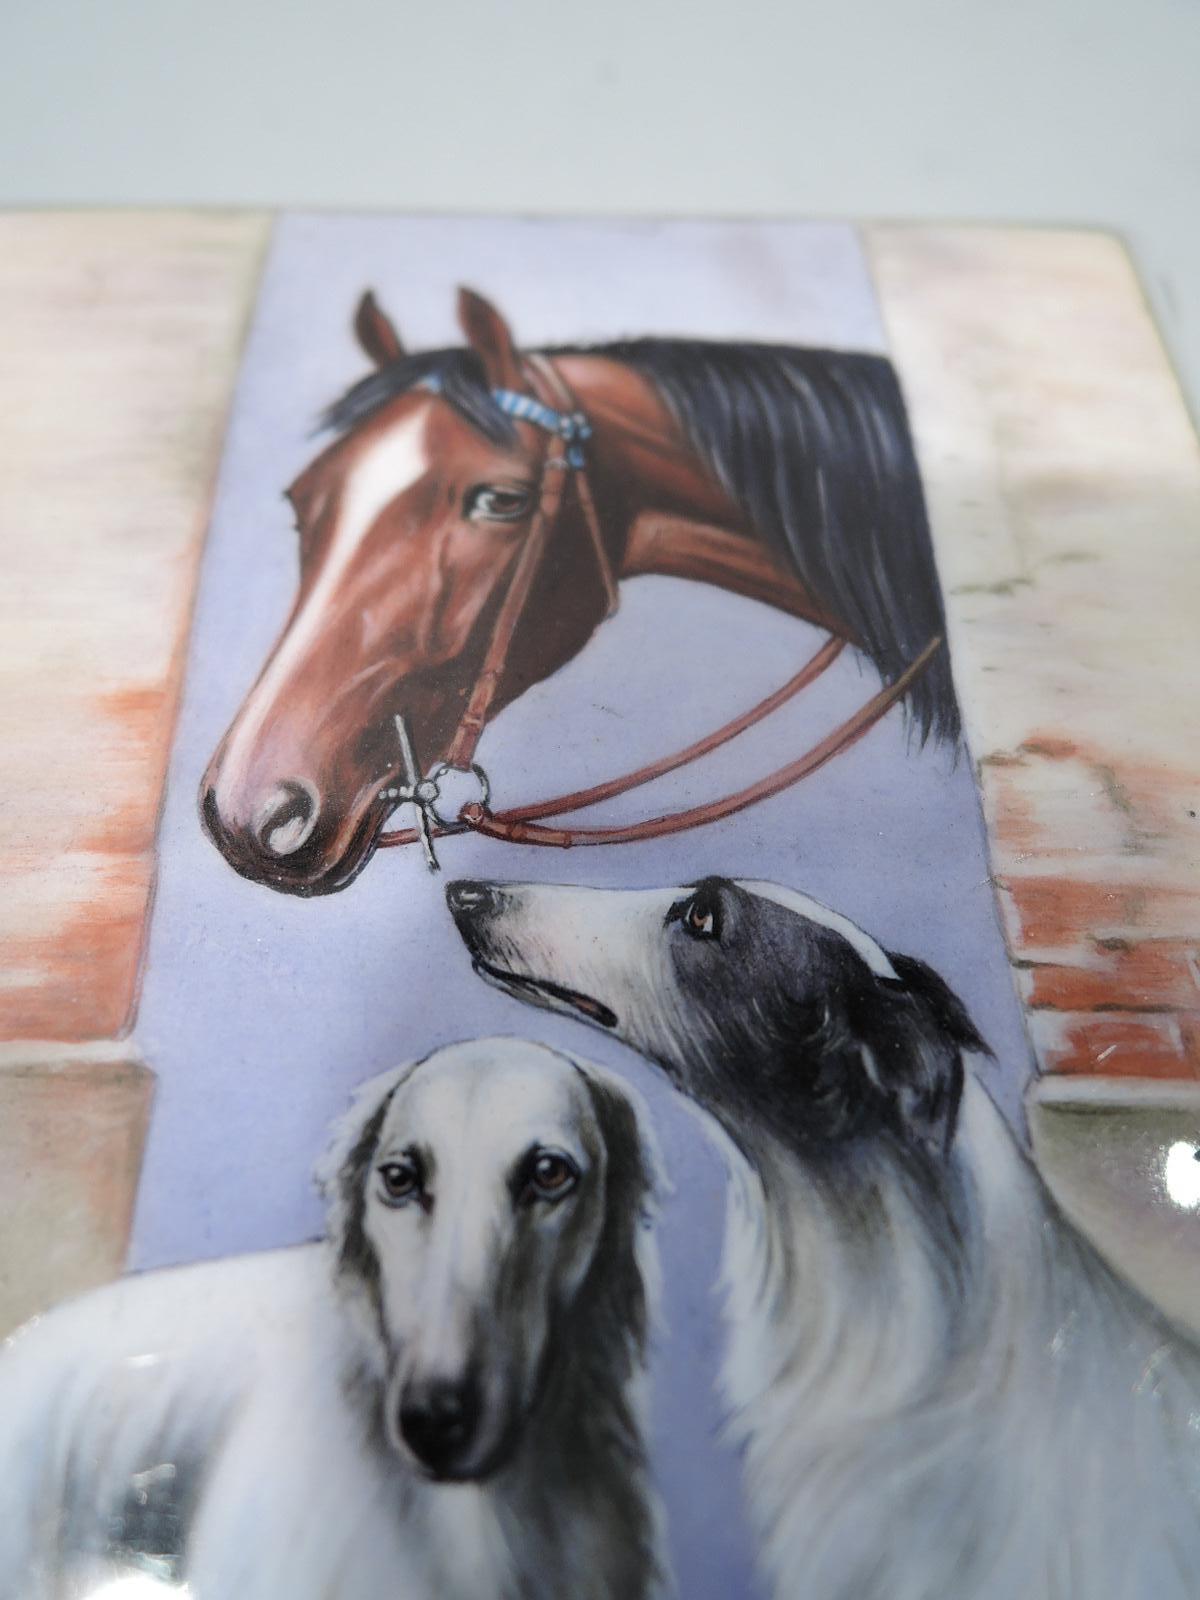 European silver and enamel cigarette case, ca 1920. Rectangular, chamfered, and hinged. On cover, a horse's head appears in an entryway, with two protective borzoi dogs standing guard. Stable drama against a semi-abstract background of brick and